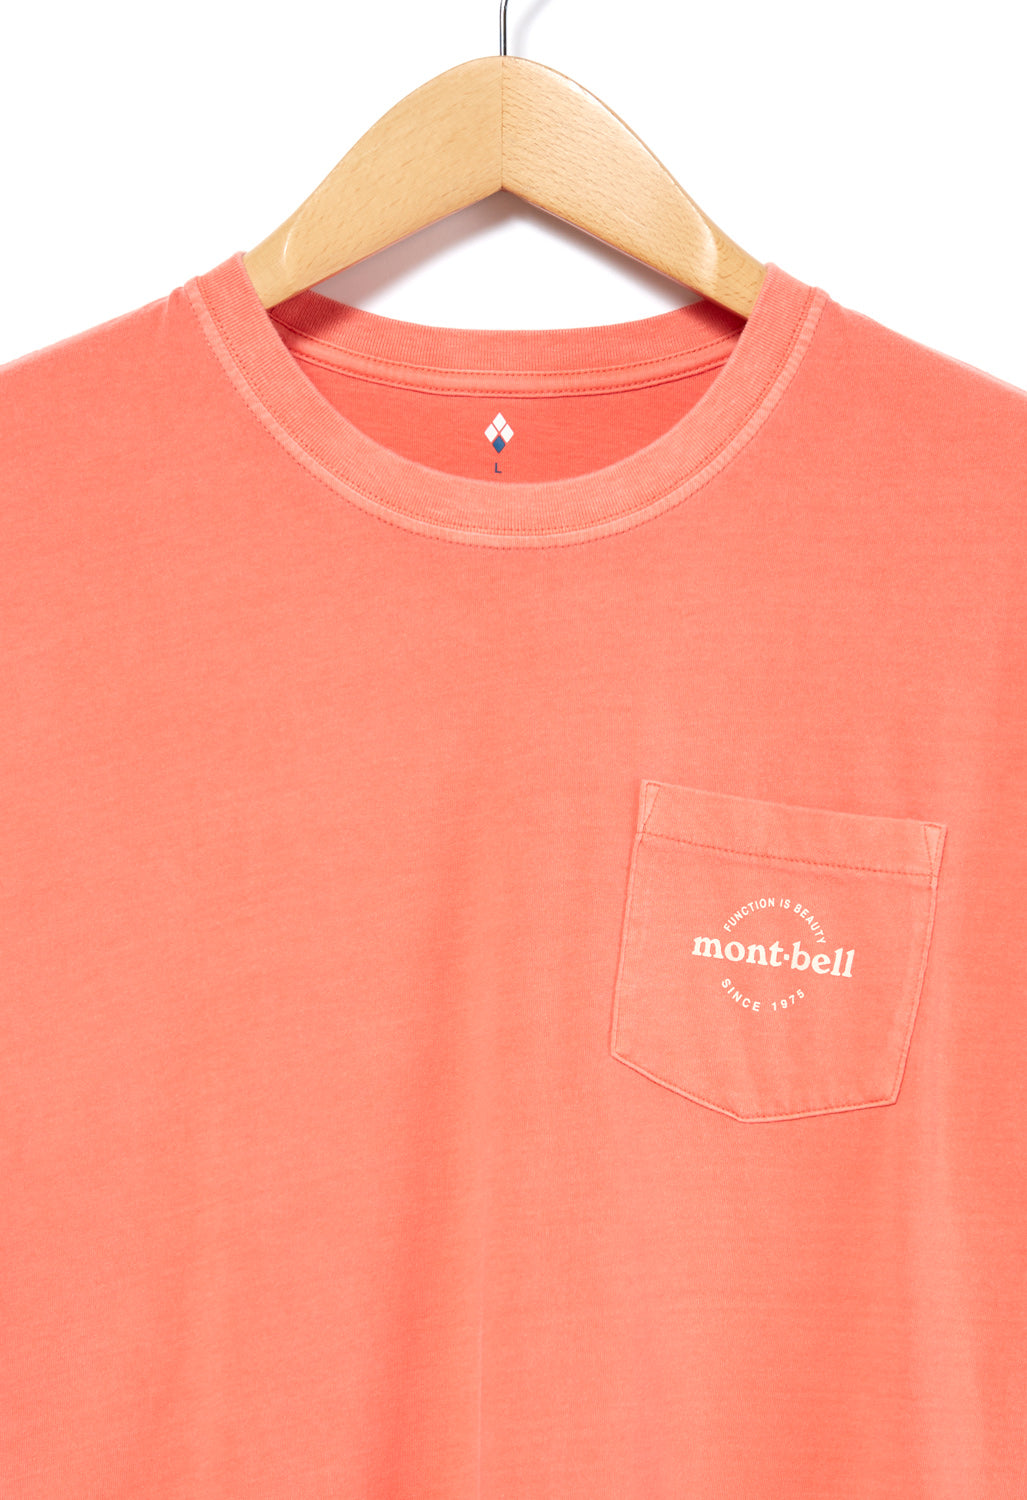 Montbell Men's Wash Out Cotton T-Shirt - Coral Pink